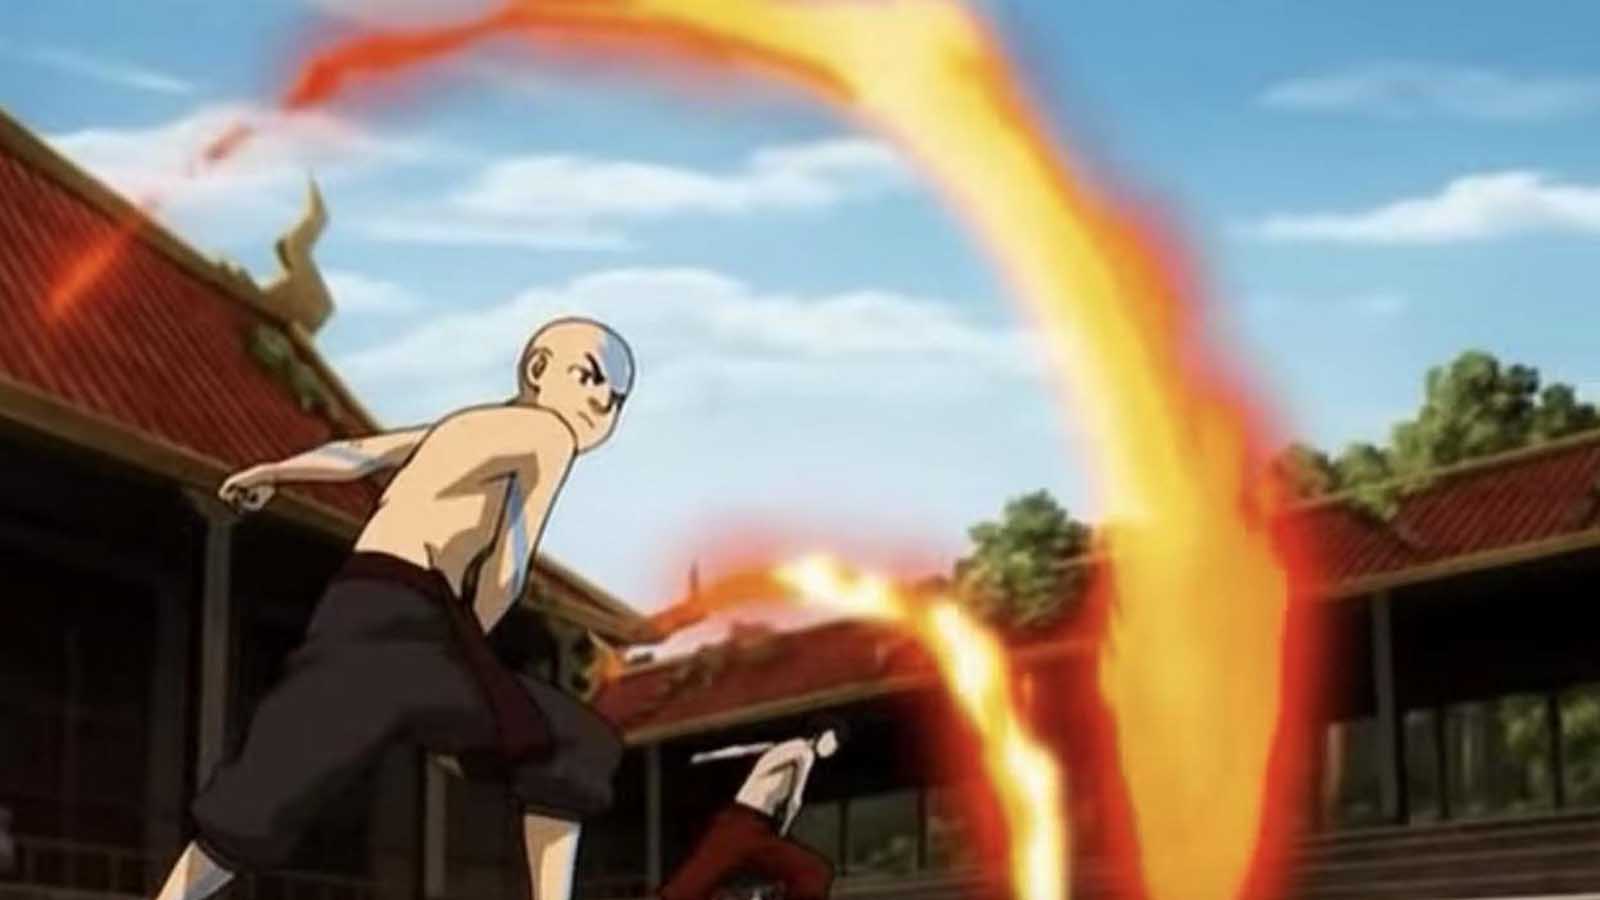 Many Gen Zers remember the iconic Nick series 'Avatar: The Last Airbender'. Those looking for a kick of nostalgia can enjoy these iconic moments on Netflix.